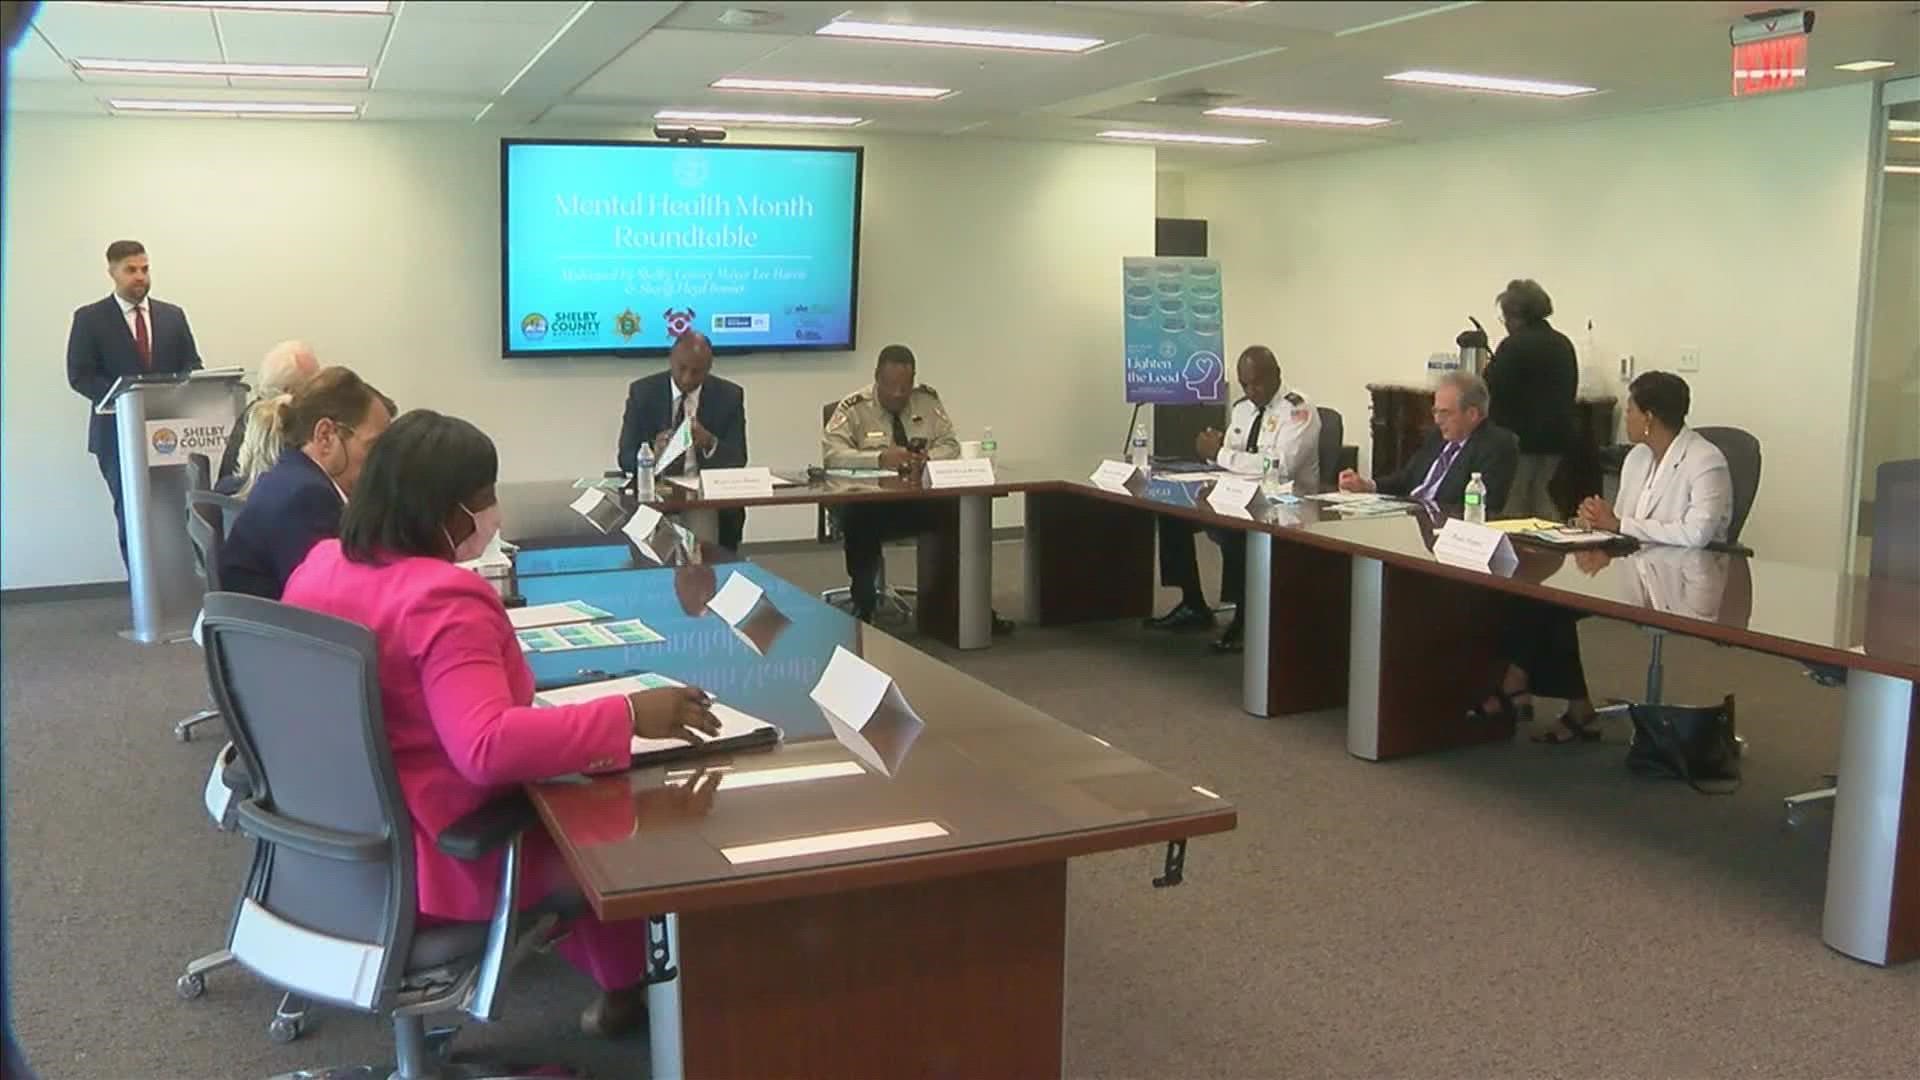 Shelby County leaders announced the new 988 number during a roundtable discussion on mental health Wednesday.